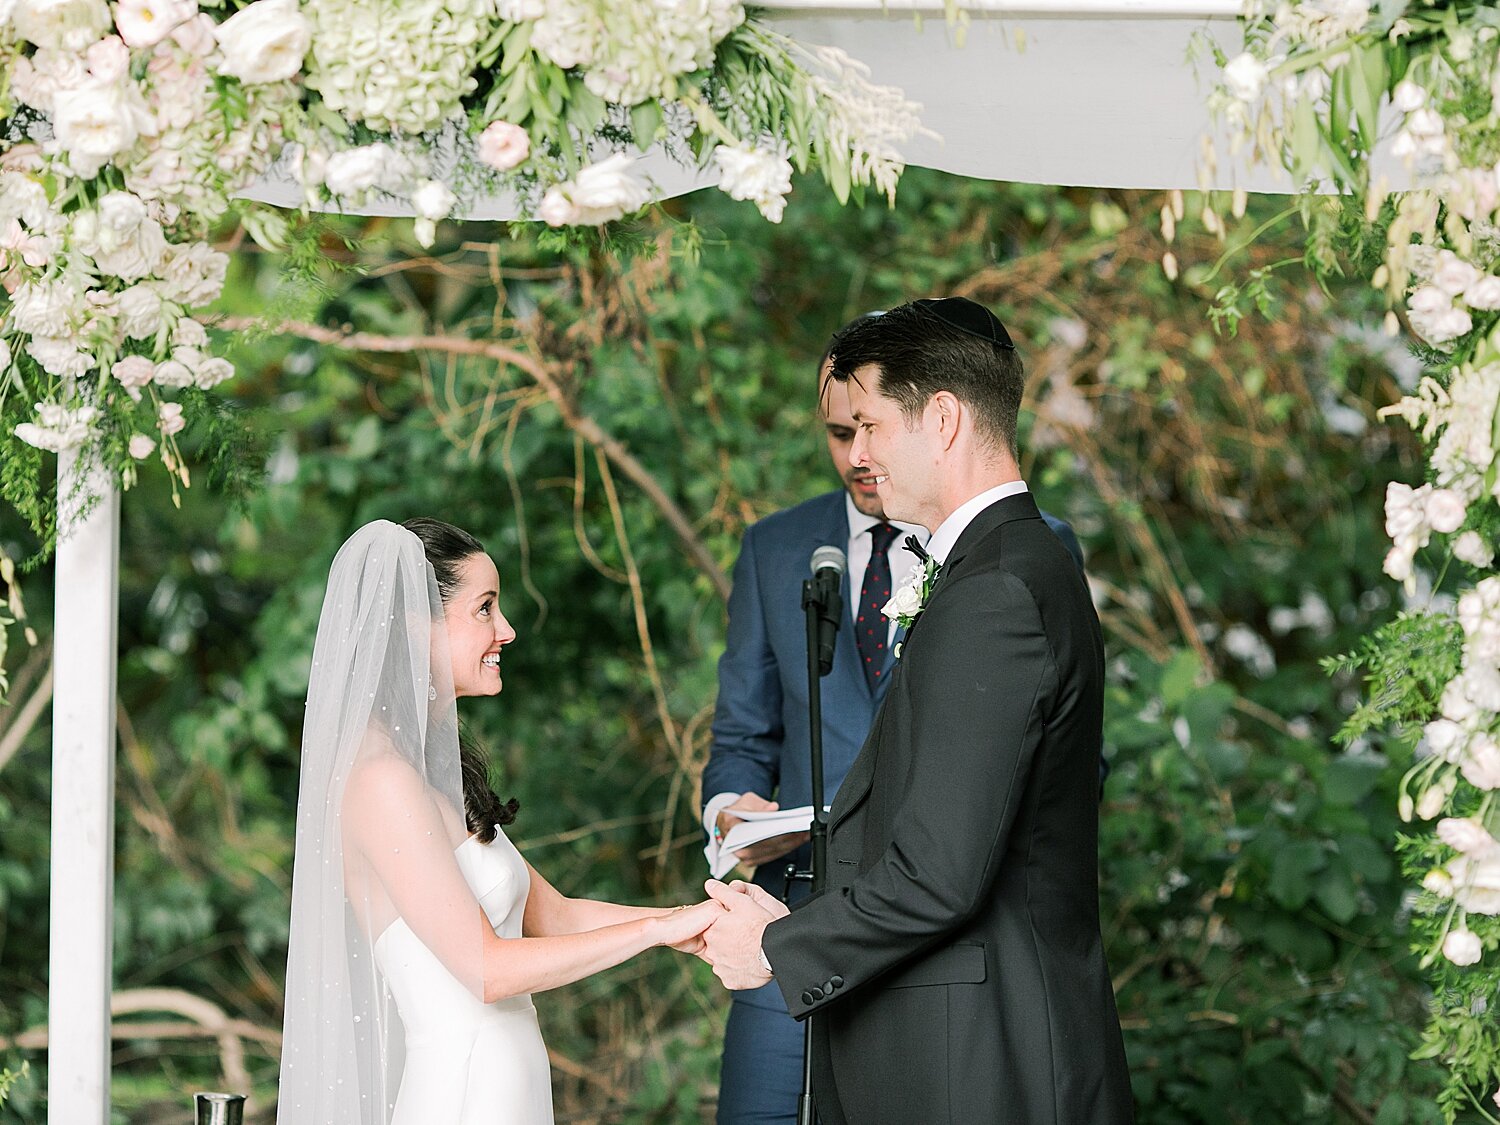 bride and groom exchange vows during wedding ceremony at home | Stylish Private Home Wedding Inspiration | Asher Gardner Photography